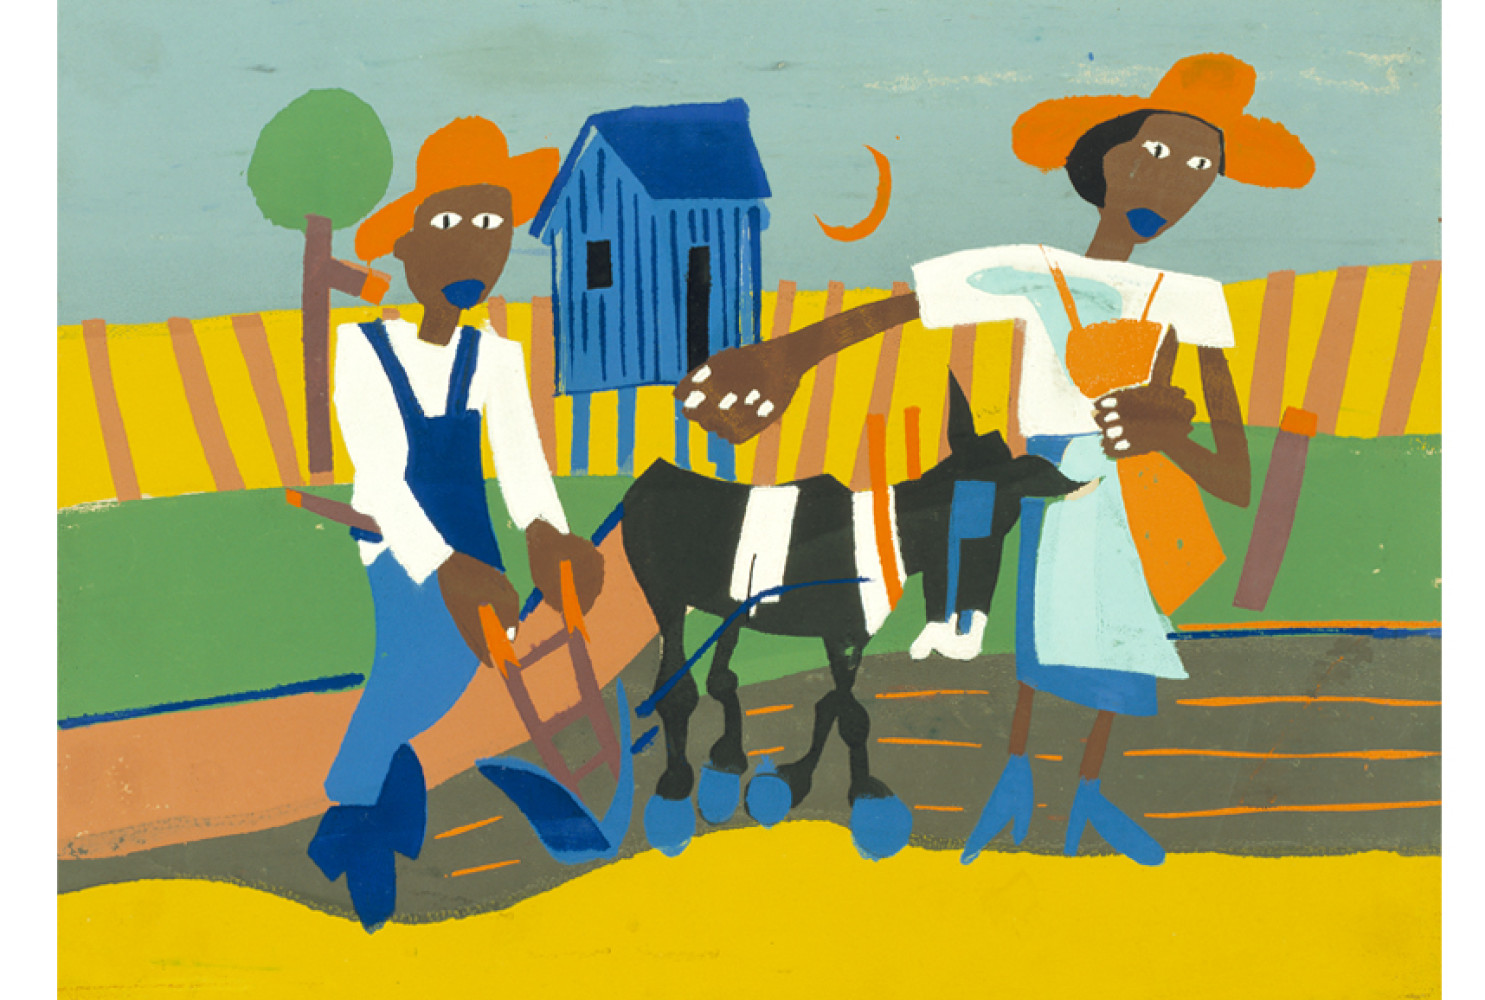 Sowing, ca. 1942, by William H. Johnson (American, 1901-1970); screenprint/silkscreen on paper; 11 1/2 x 16 inches; Museum Purchase with funds provided by the Anna Heyward Taylor Fund; 1959.020.0002
